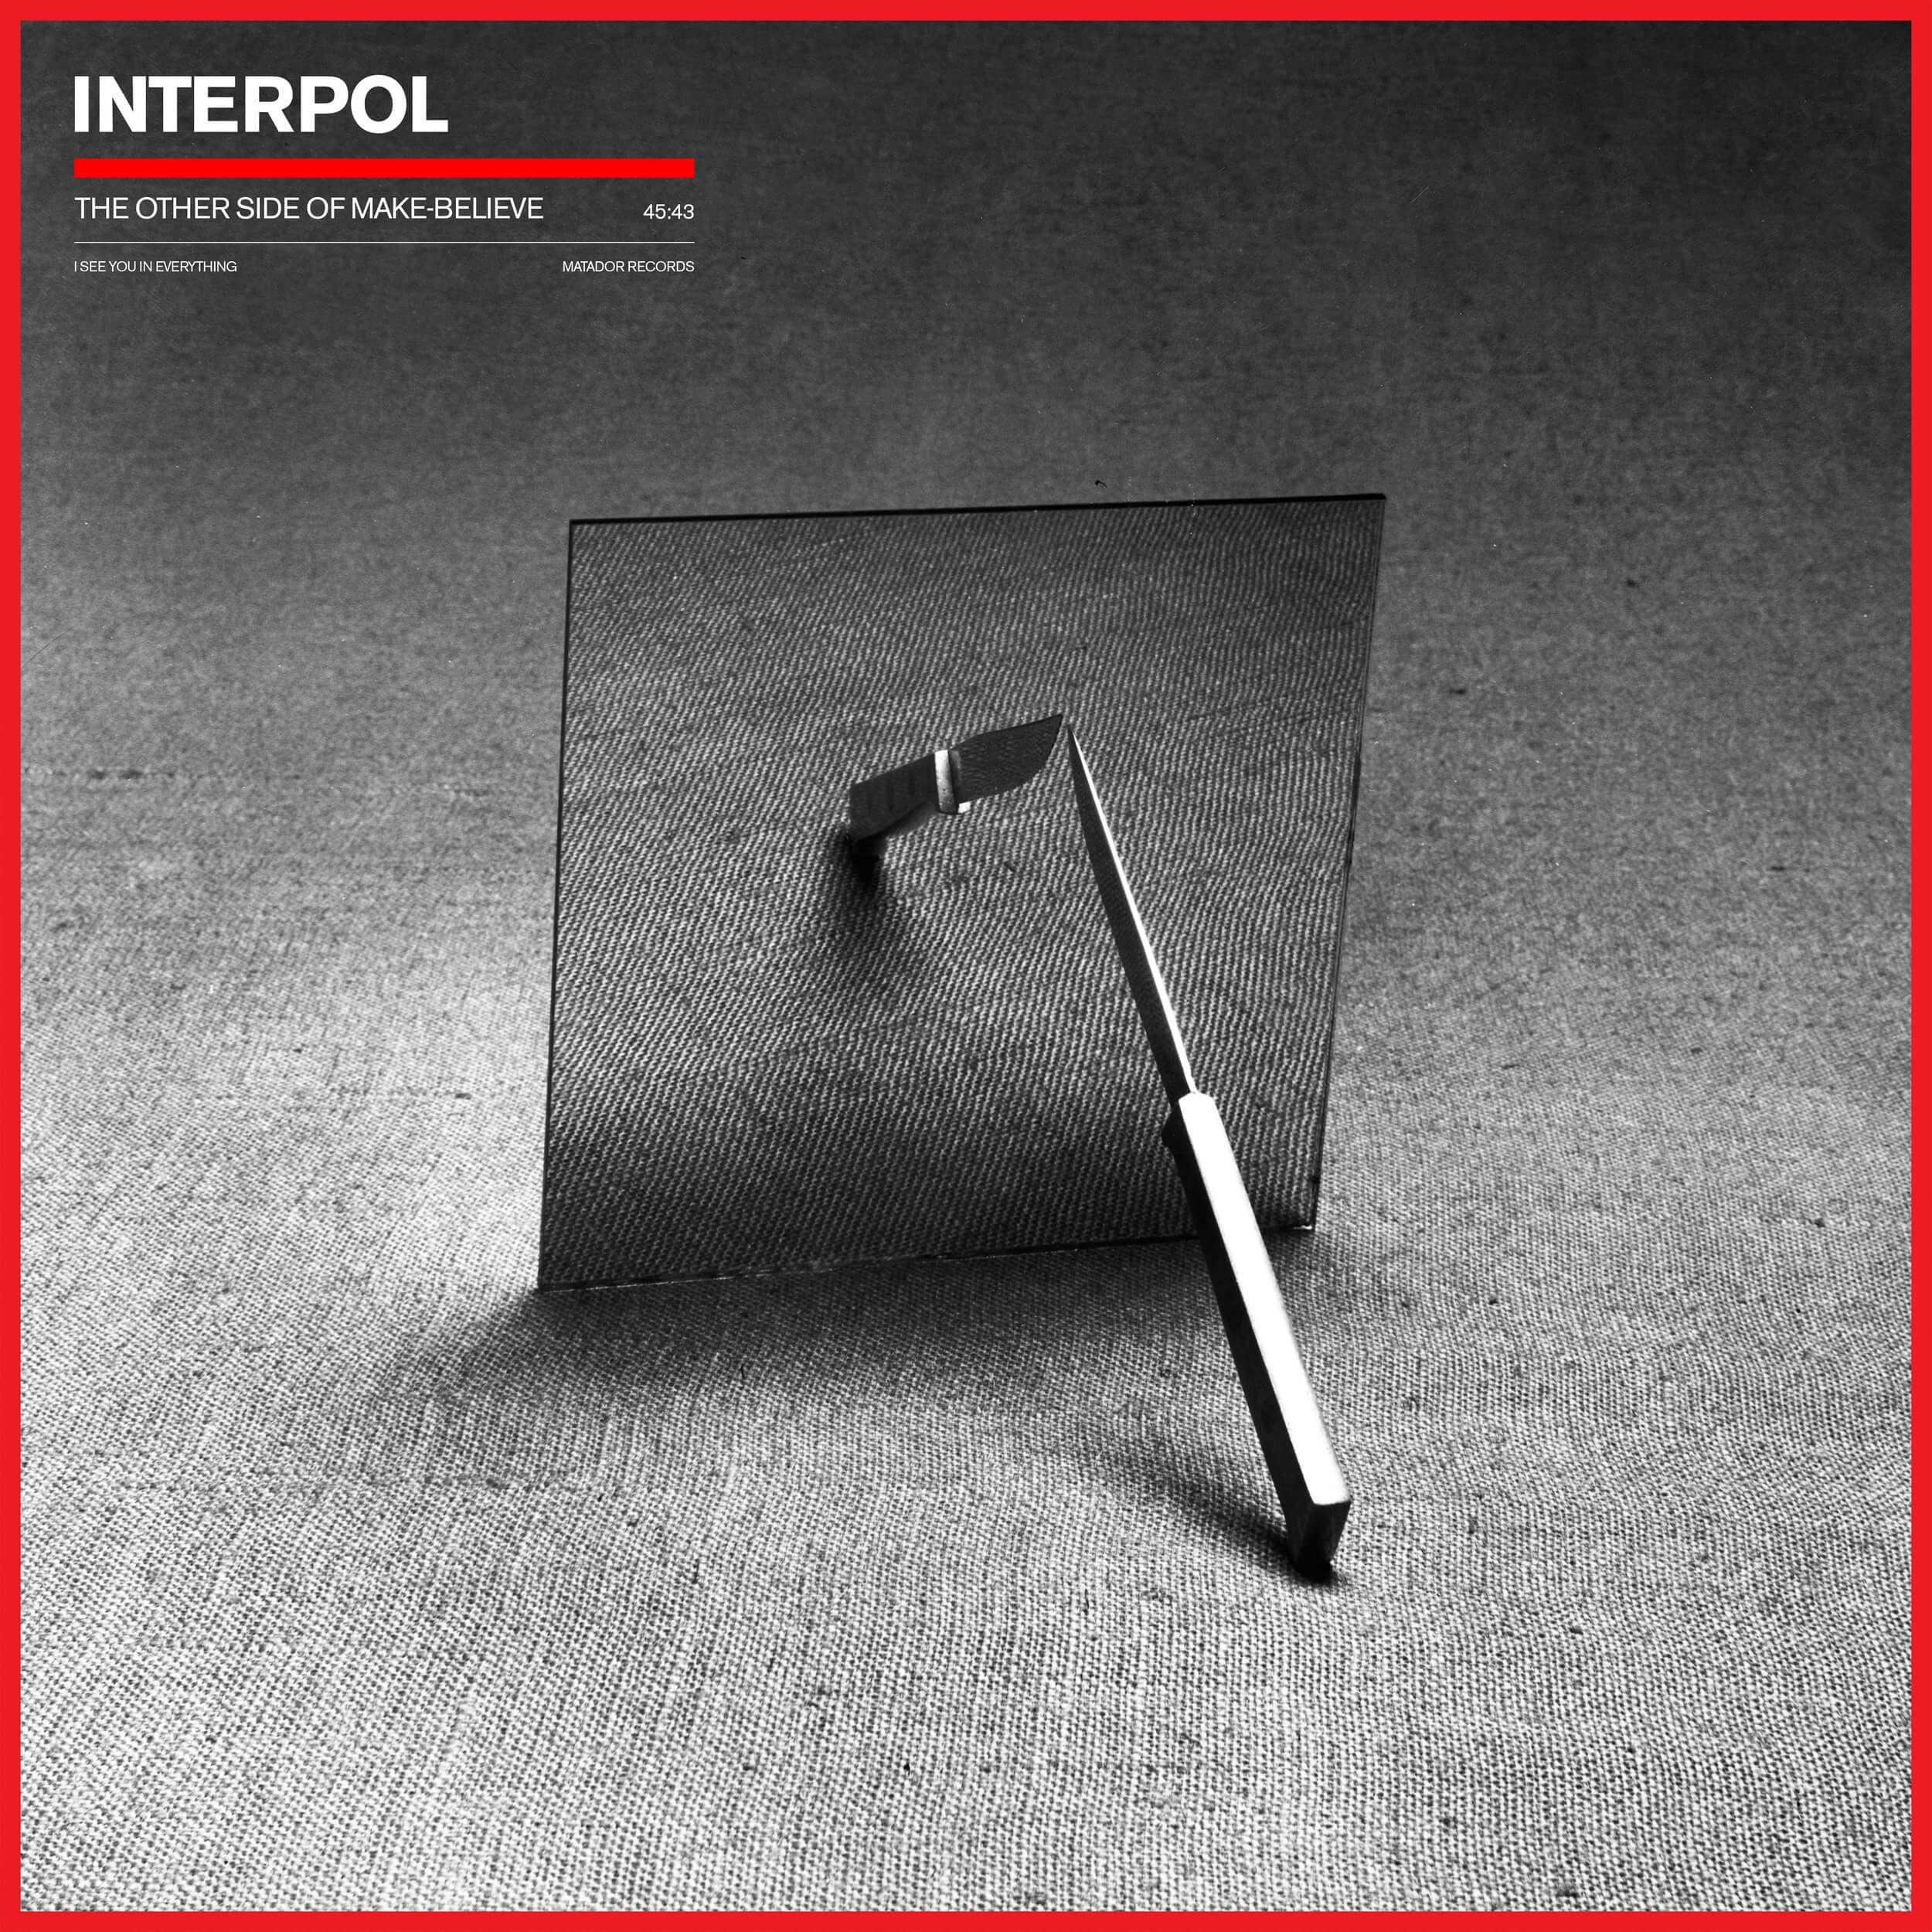 The Other Side of Make-Believe by Interpol Album review by Adam Fink for Northern Transmissions